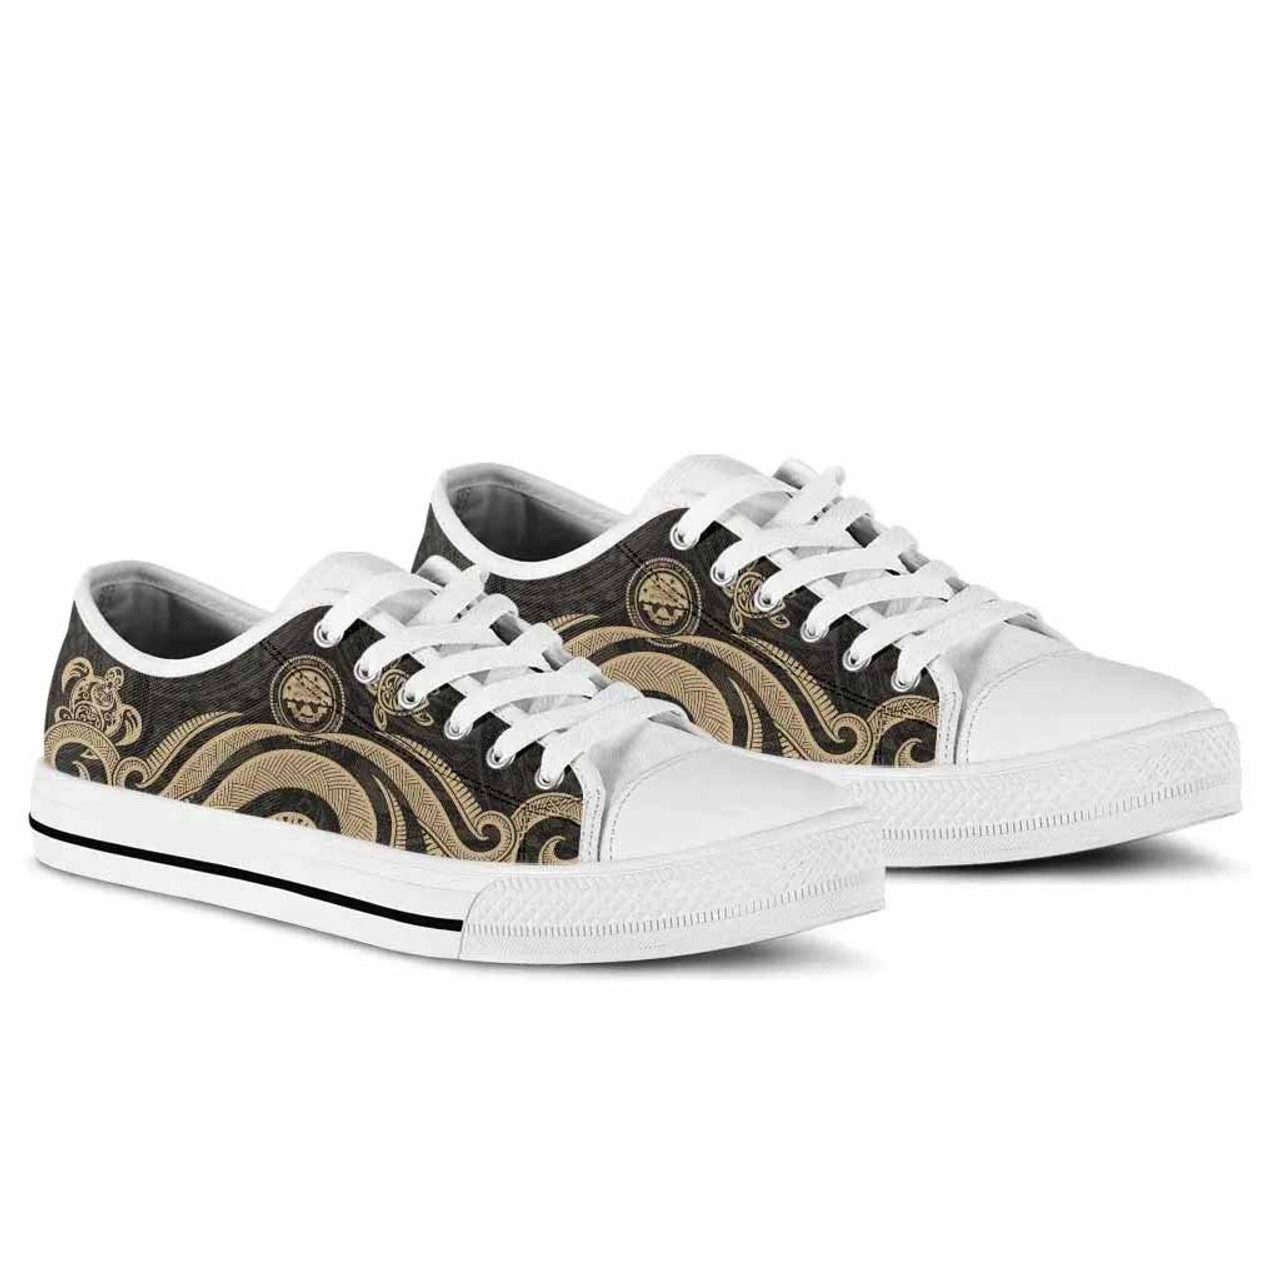 Federated States of Micronesia Low Top Canvas Shoes - Gold Tentacle Turtle 7